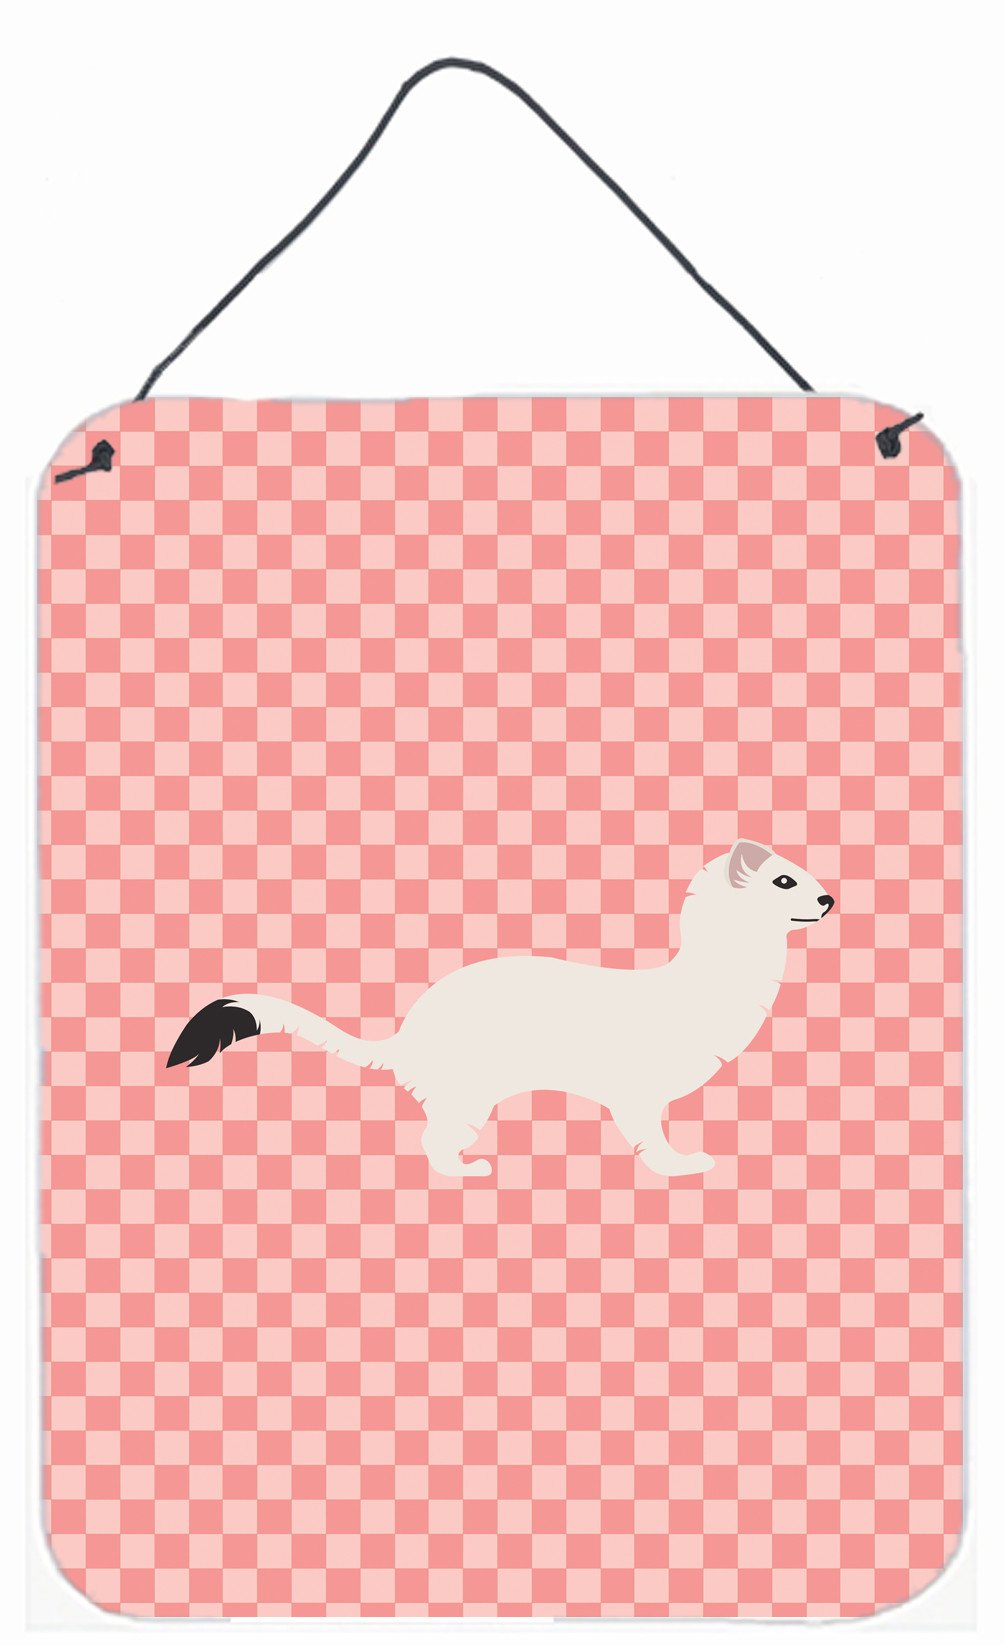 Stoat Short-tailed Weasel Pink Check Wall or Door Hanging Prints BB7872DS1216 by Caroline's Treasures